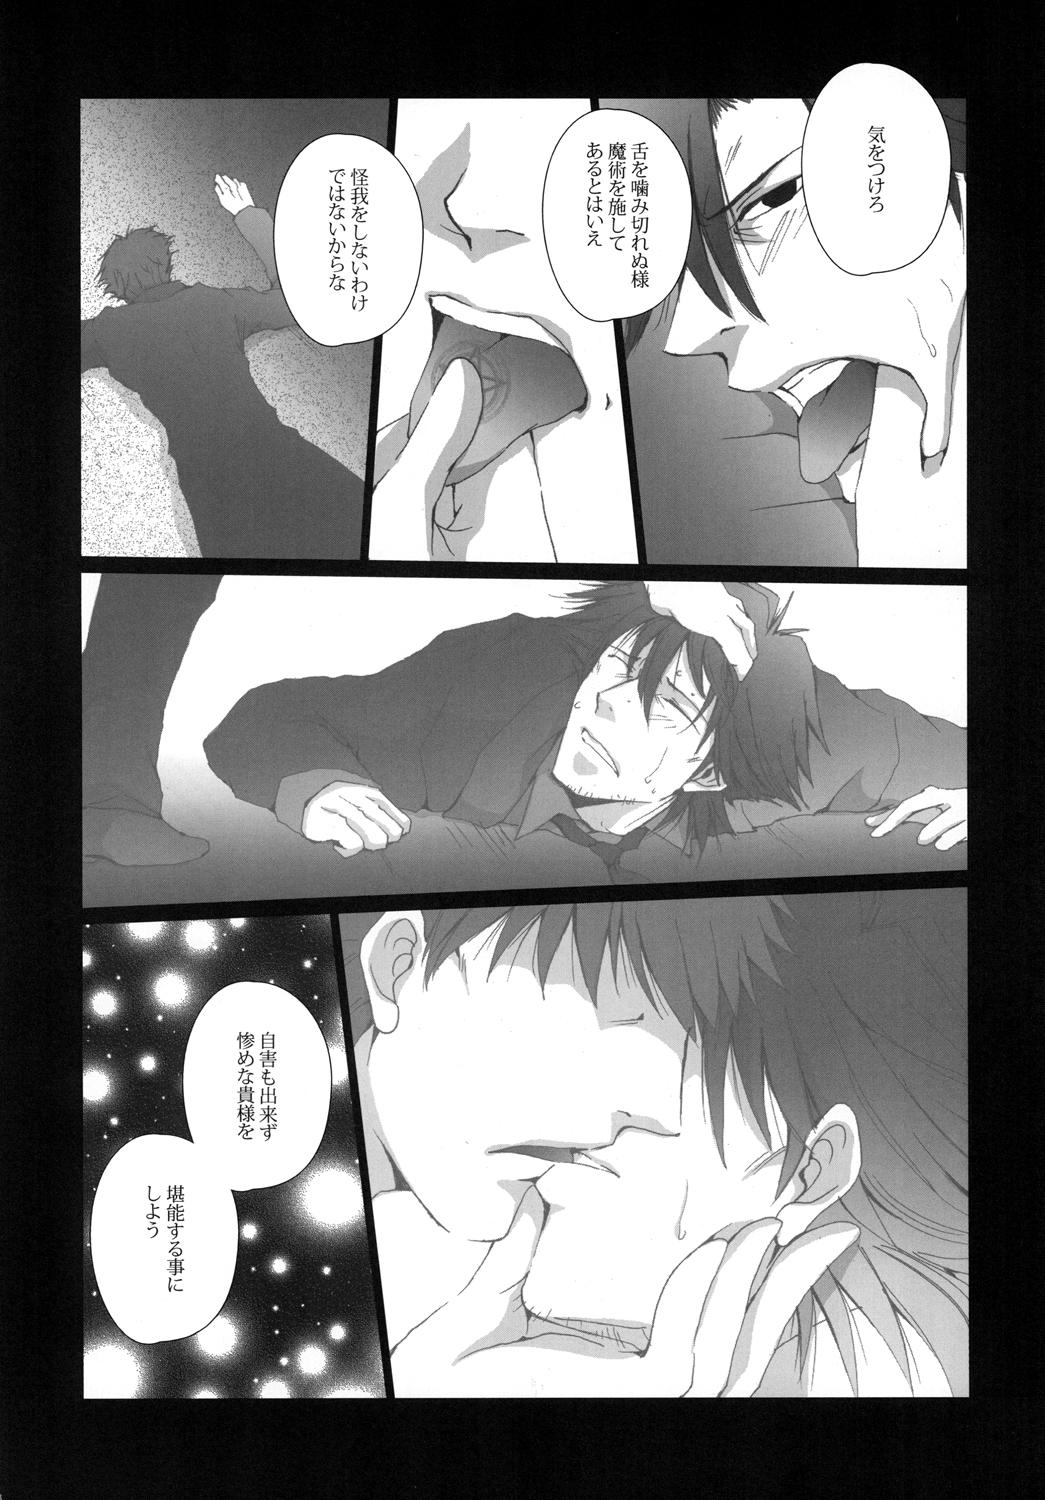 Foreplay Imprisonment - Fate zero Kissing - Page 9